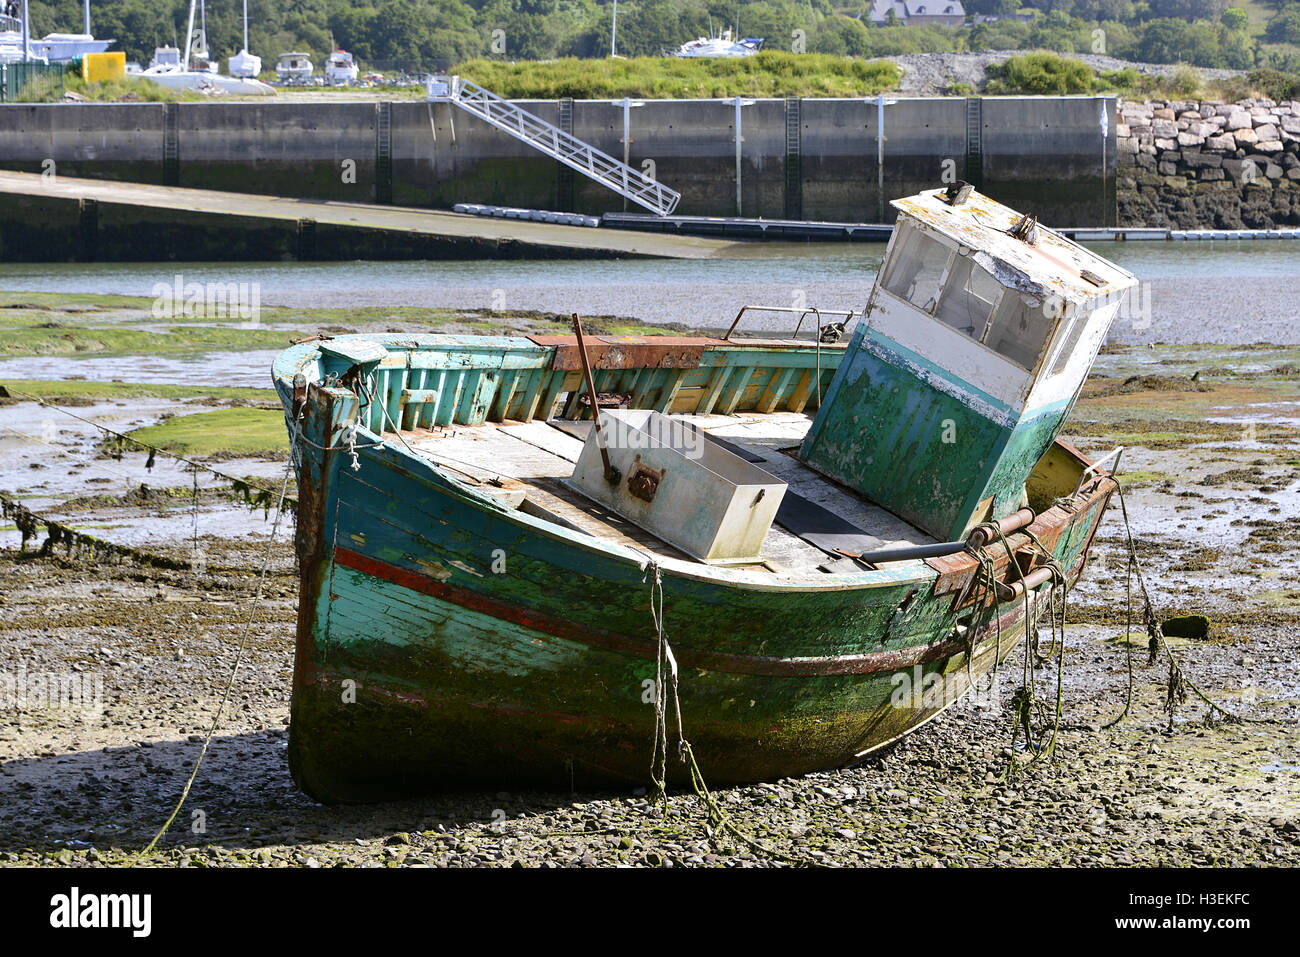 Ship wreck in the harbor of Paimpol, a commune in the Côtes-d'Armor department in Brittany in northwestern France Stock Photo